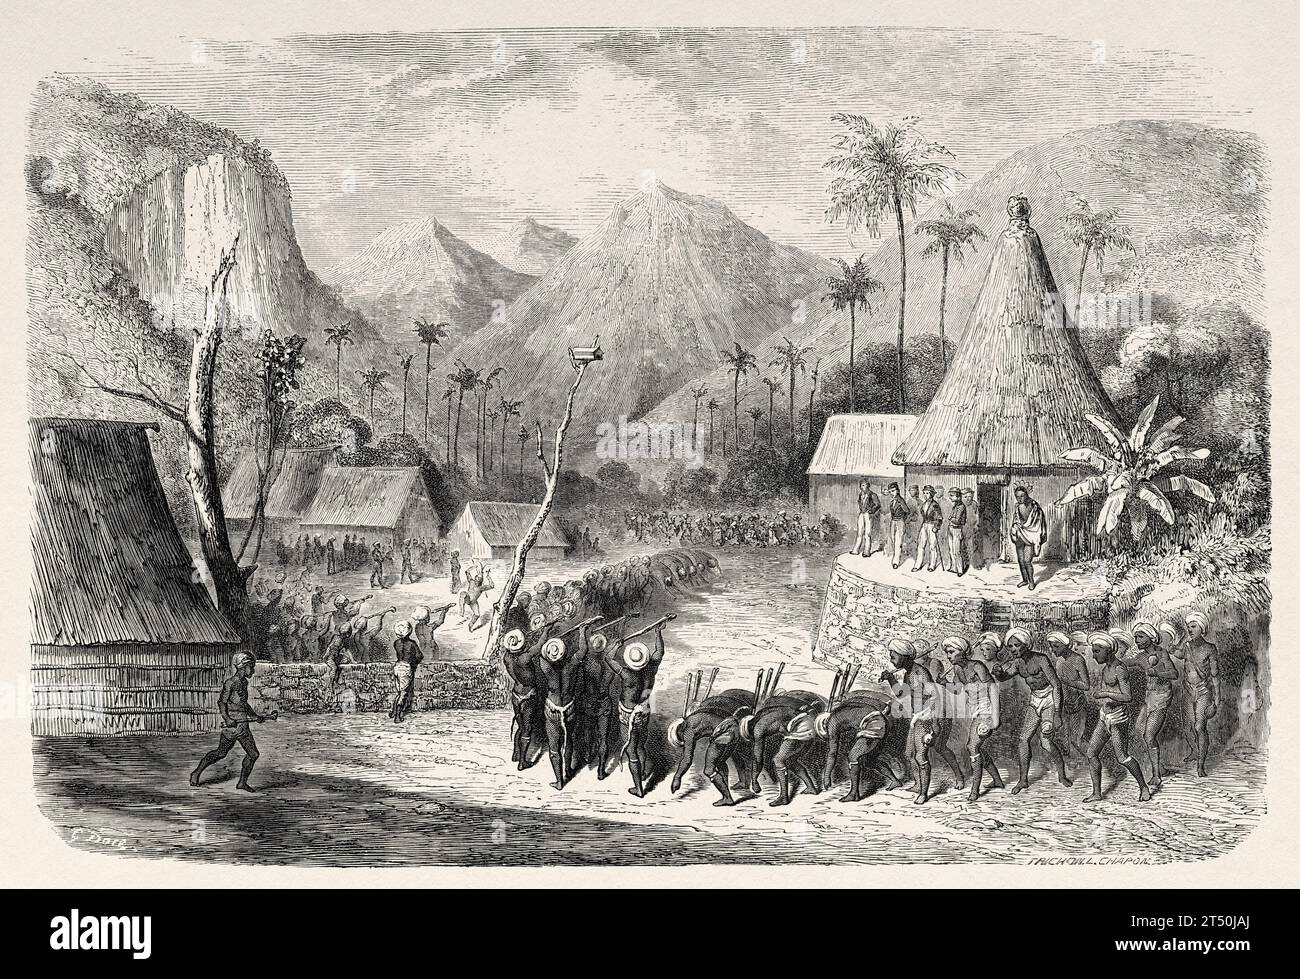 Fiji islands warriors dance, Fiji islands. Melanesia, Oceania in the southwestern Pacific Ocean. Voyage to the Great Viti, great equinoctial ocean by John Denis Macdonald 1855. Old 19th century engraving from Le Tour du Monde 1860 Stock Photo